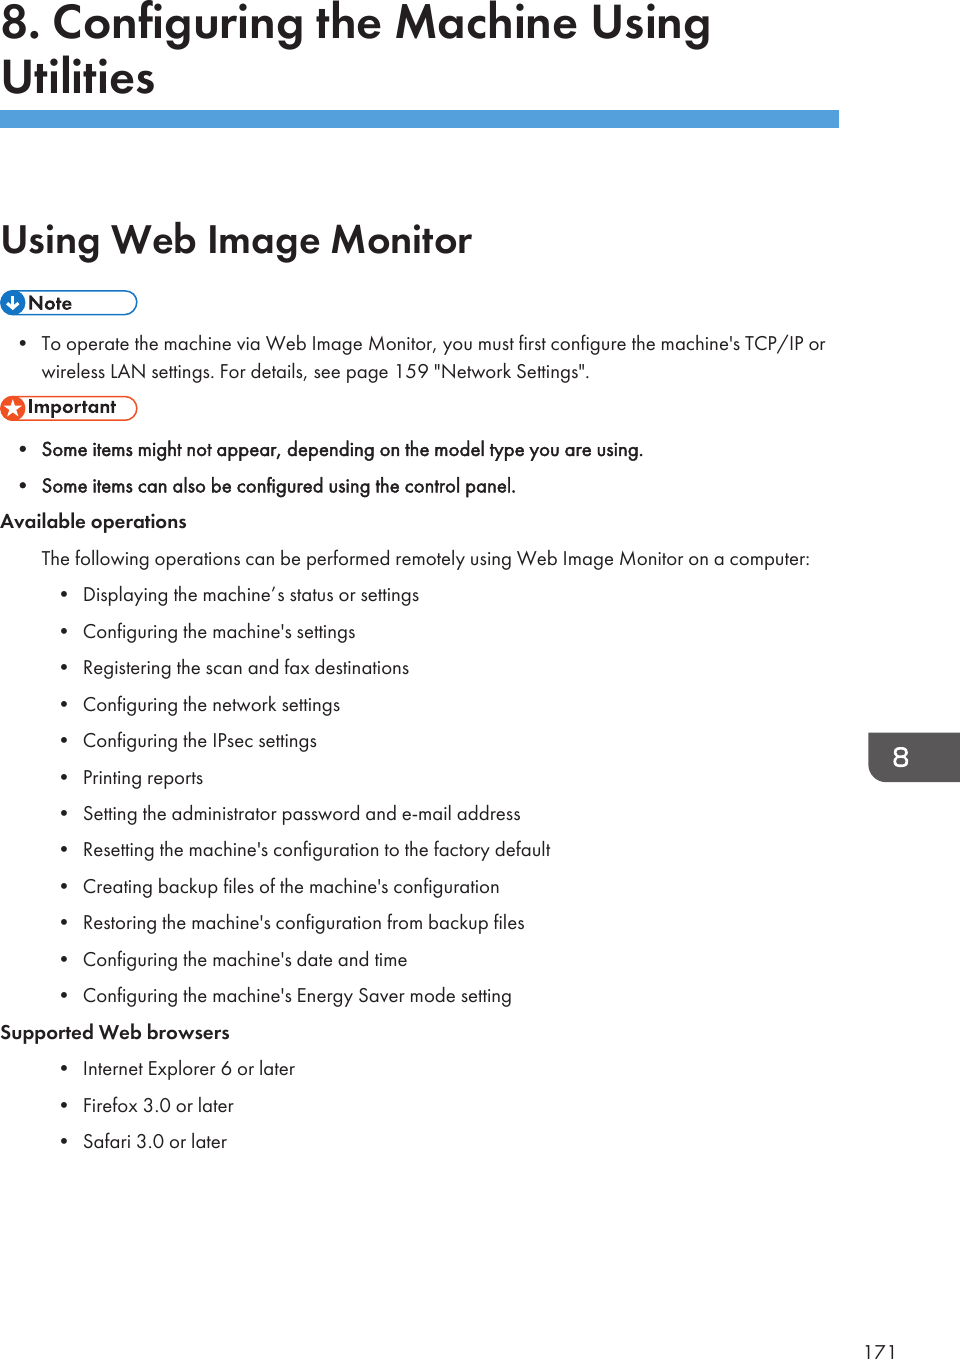 8. Configuring the Machine UsingUtilitiesUsing Web Image Monitor• To operate the machine via Web Image Monitor, you must first configure the machine&apos;s TCP/IP orwireless LAN settings. For details, see page 159 &quot;Network Settings&quot;.• Some items might not appear, depending on the model type you are using.• Some items can also be configured using the control panel.Available operationsThe following operations can be performed remotely using Web Image Monitor on a computer:• Displaying the machine’s status or settings• Configuring the machine&apos;s settings• Registering the scan and fax destinations• Configuring the network settings• Configuring the IPsec settings• Printing reports• Setting the administrator password and e-mail address• Resetting the machine&apos;s configuration to the factory default• Creating backup files of the machine&apos;s configuration• Restoring the machine&apos;s configuration from backup files• Configuring the machine&apos;s date and time• Configuring the machine&apos;s Energy Saver mode settingSupported Web browsers• Internet Explorer 6 or later• Firefox 3.0 or later• Safari 3.0 or later171